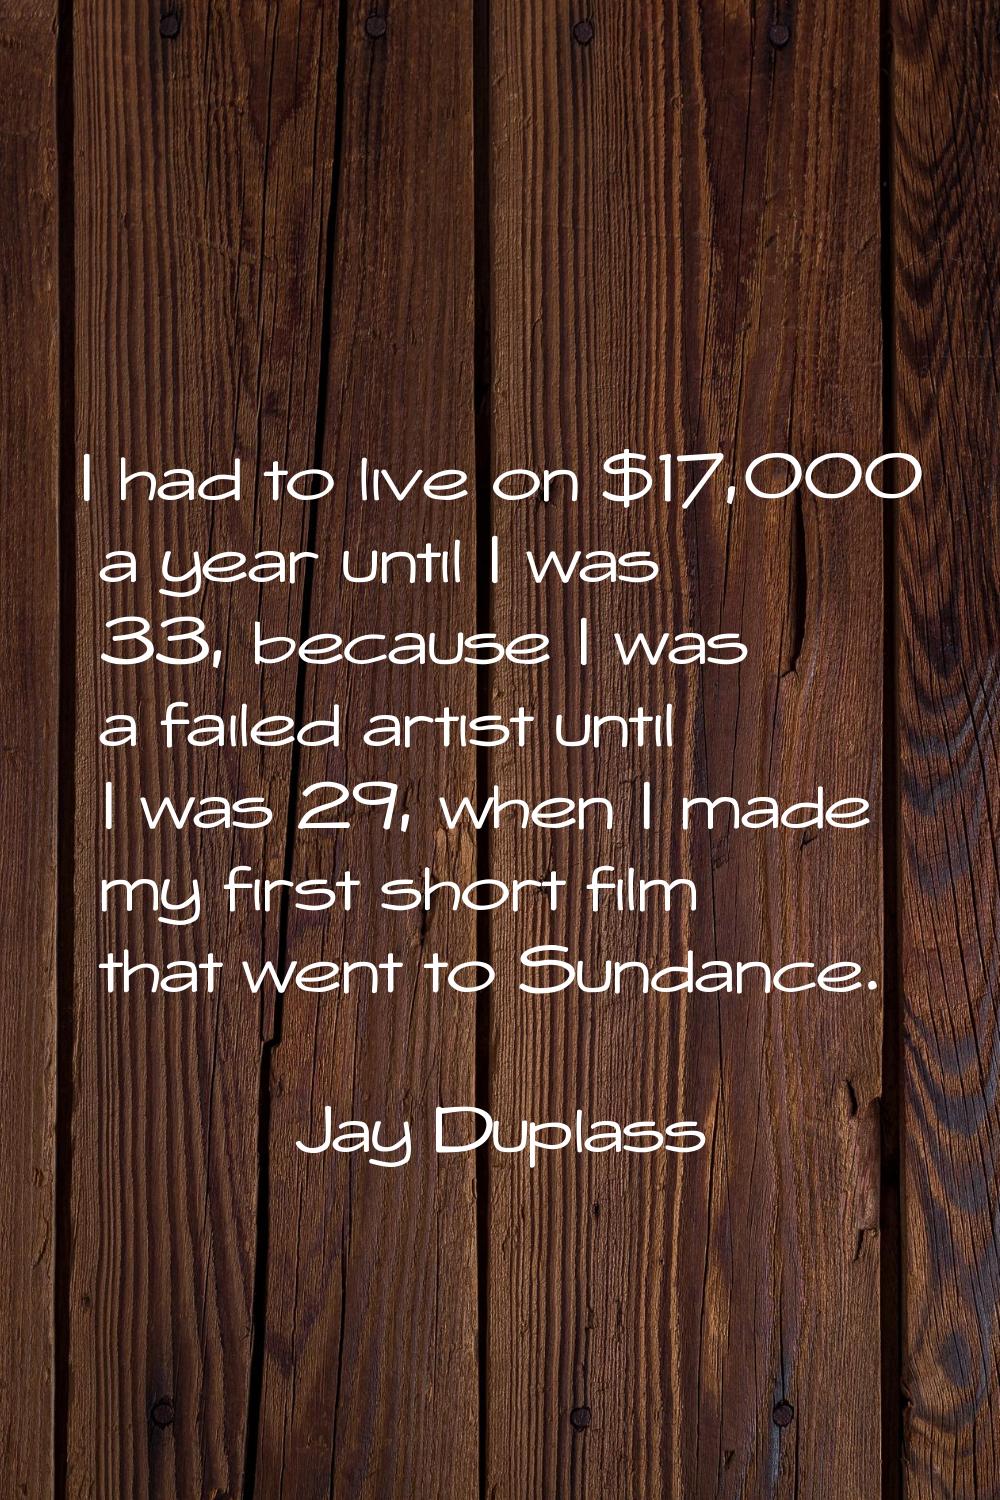 I had to live on $17,000 a year until I was 33, because I was a failed artist until I was 29, when 